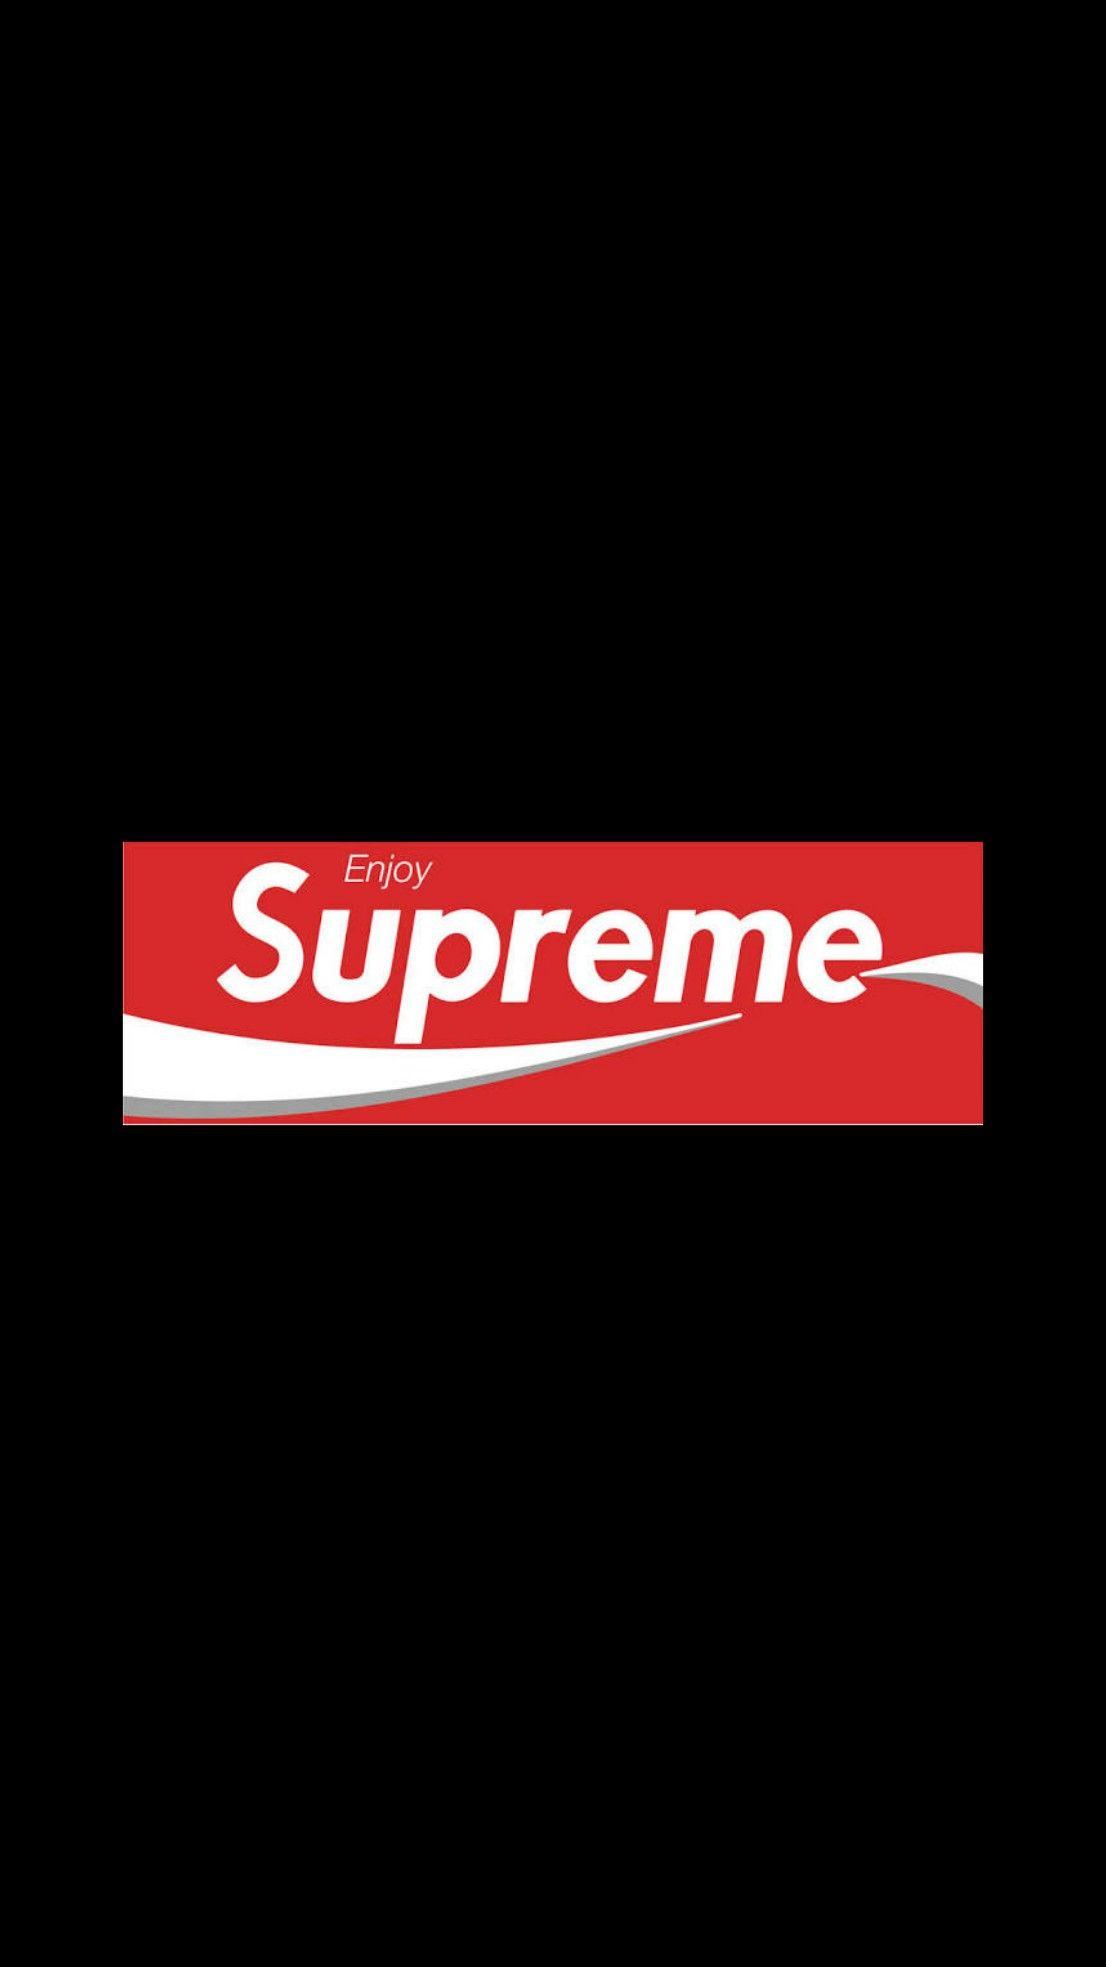 Cool Things with Supreme Logo - LiftedMiles #SupremeWallpaper XIST | CreatedResearch | Pinterest ...